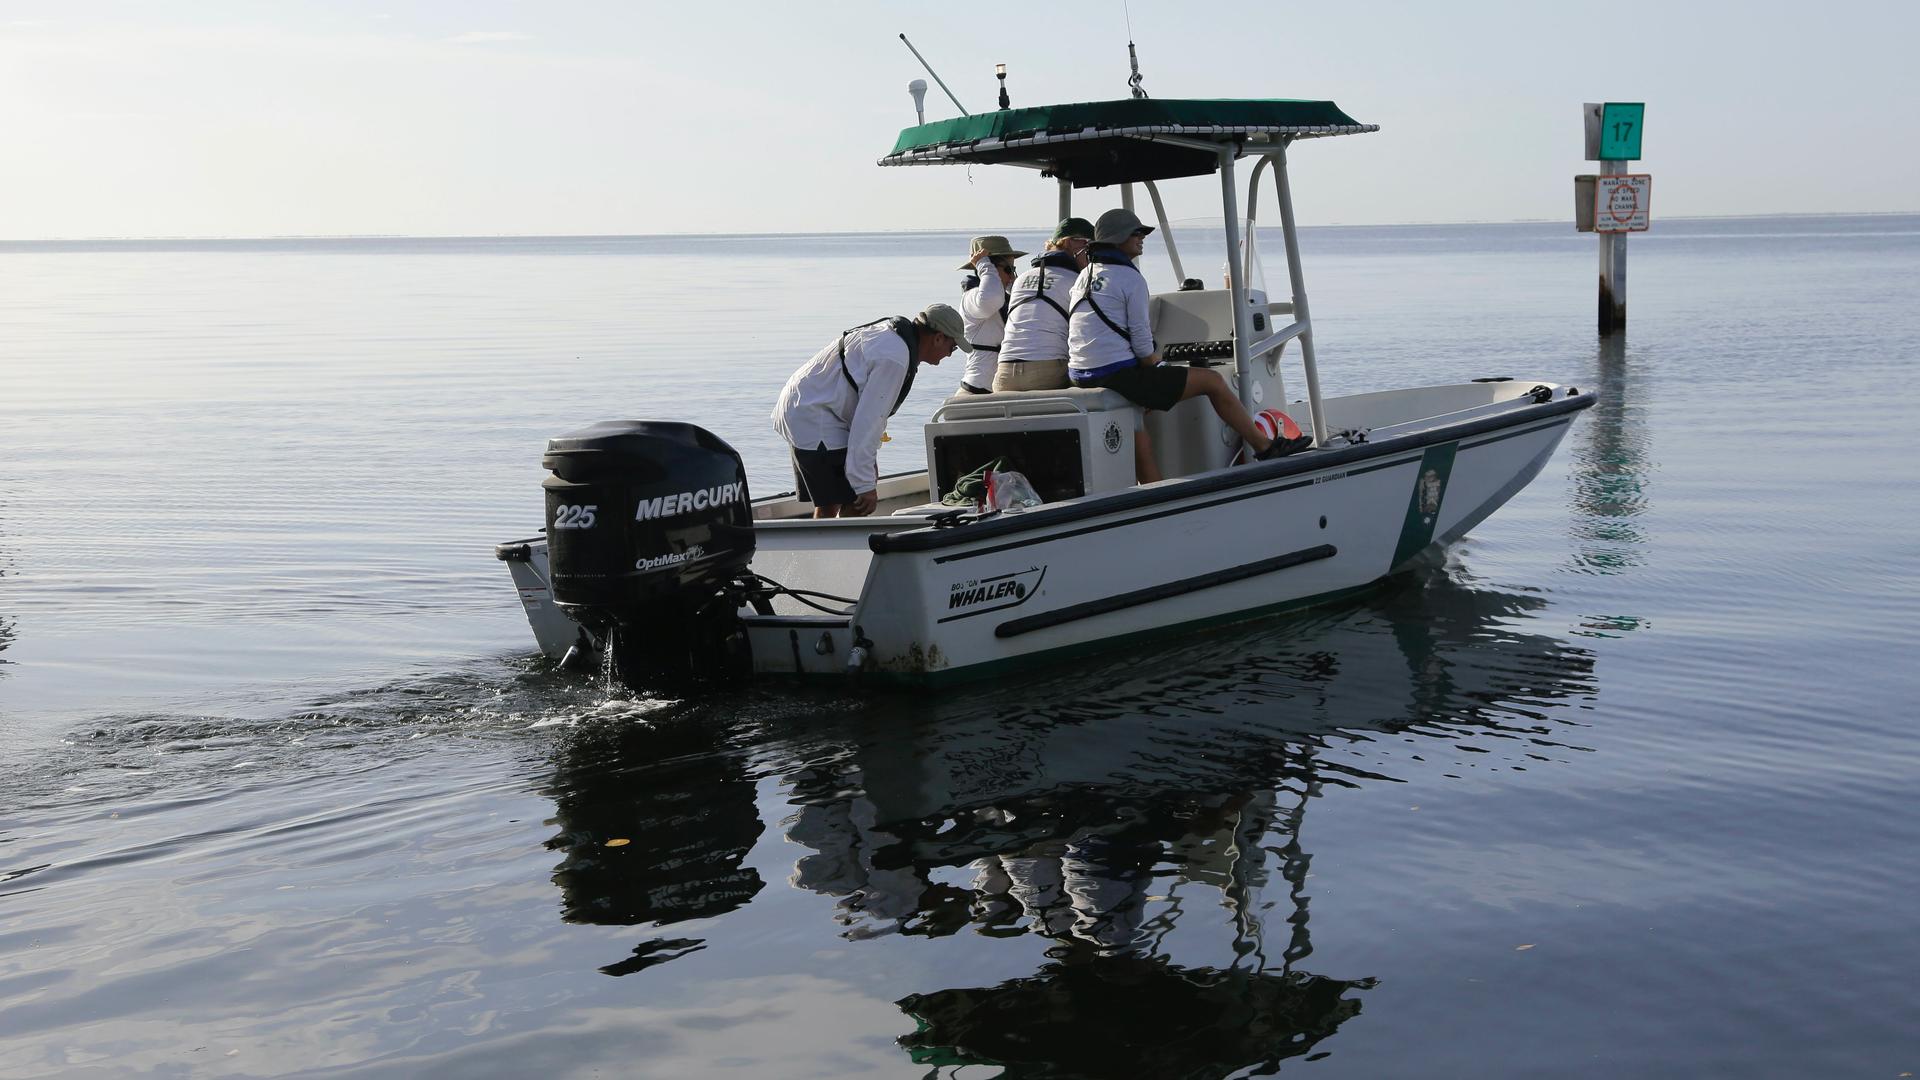 A National Park Service boat navigates the waters in Biscayne National Park, Florida, July 8, 2014. Federal officials are seeking to ban commercial fishing in the park which is offshore from suburban Miami. Officials say cutting off commercial fishing wil